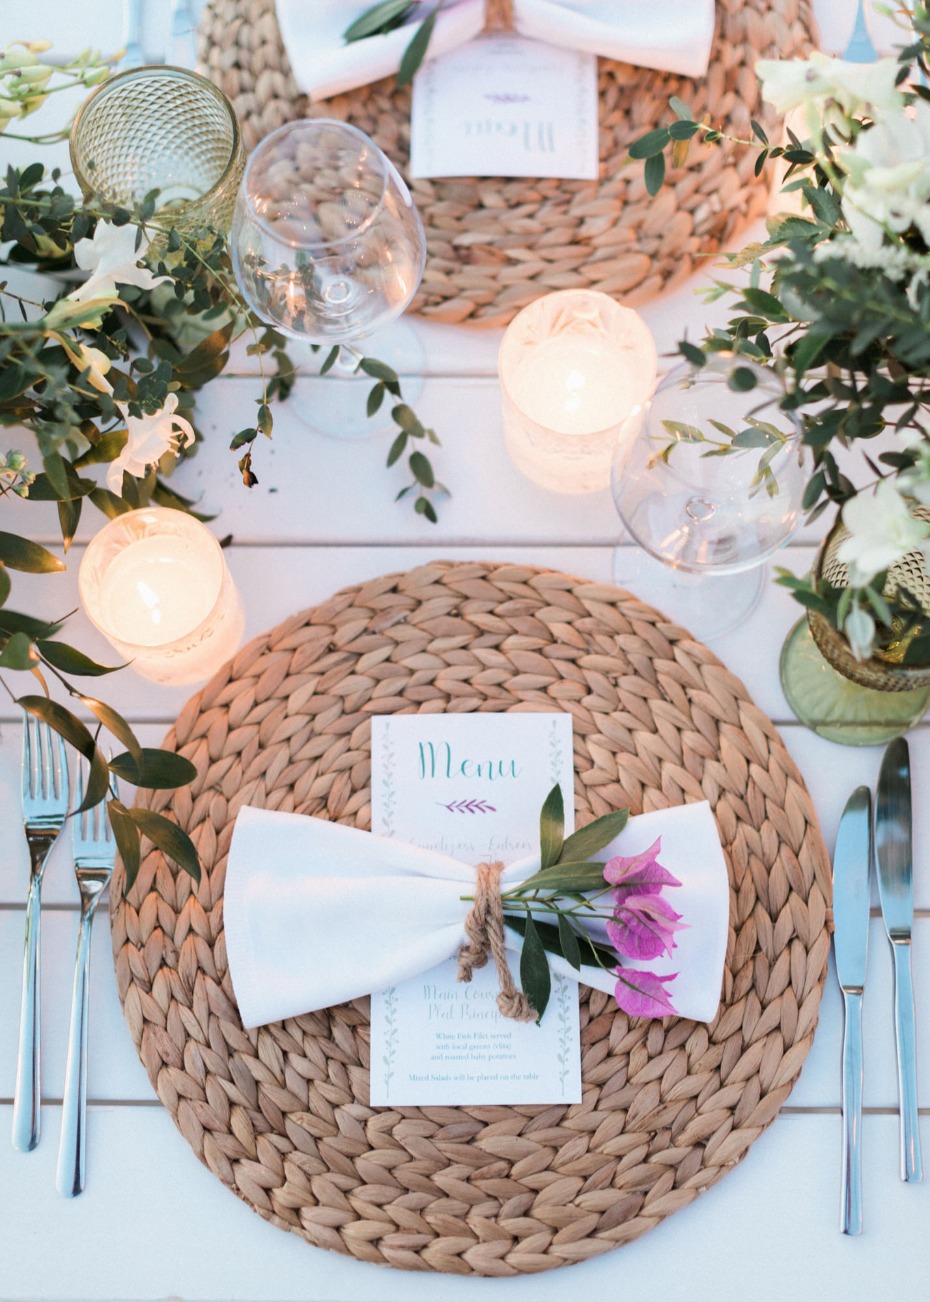 Natural place setting